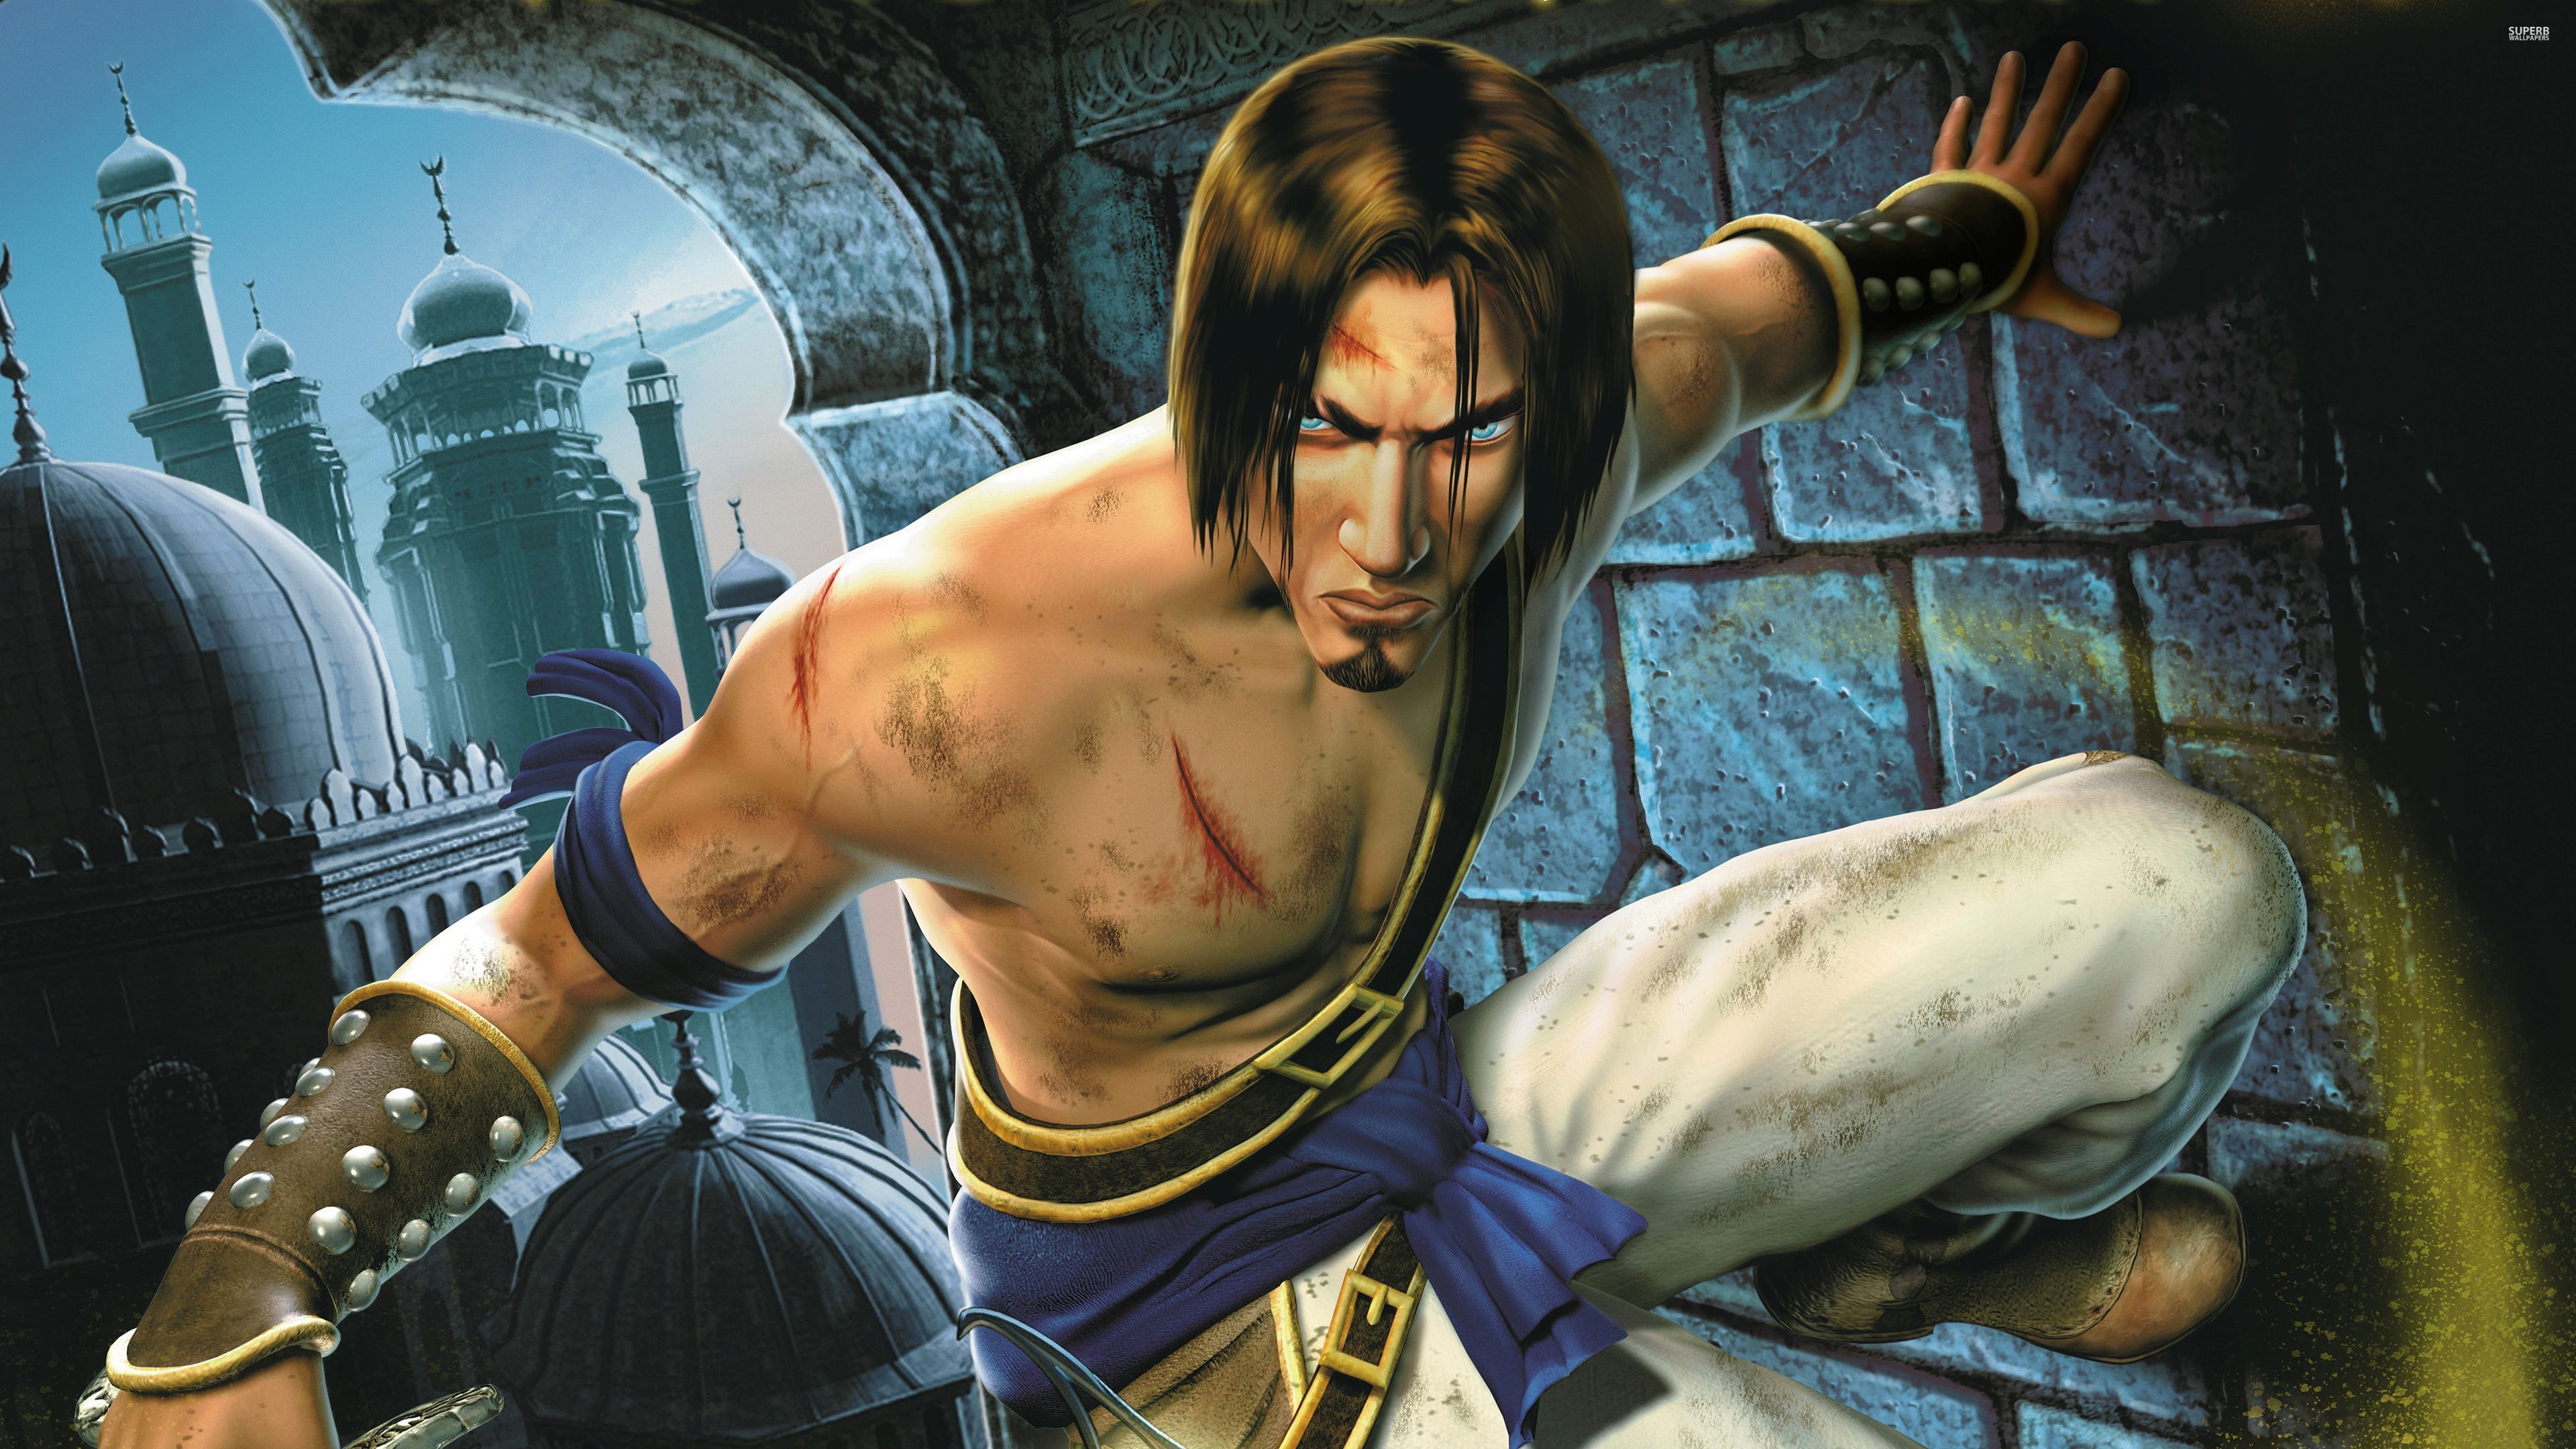 Download - Prince Of Persia The Sands Of Time Игра , HD Wallpaper & Backgrounds